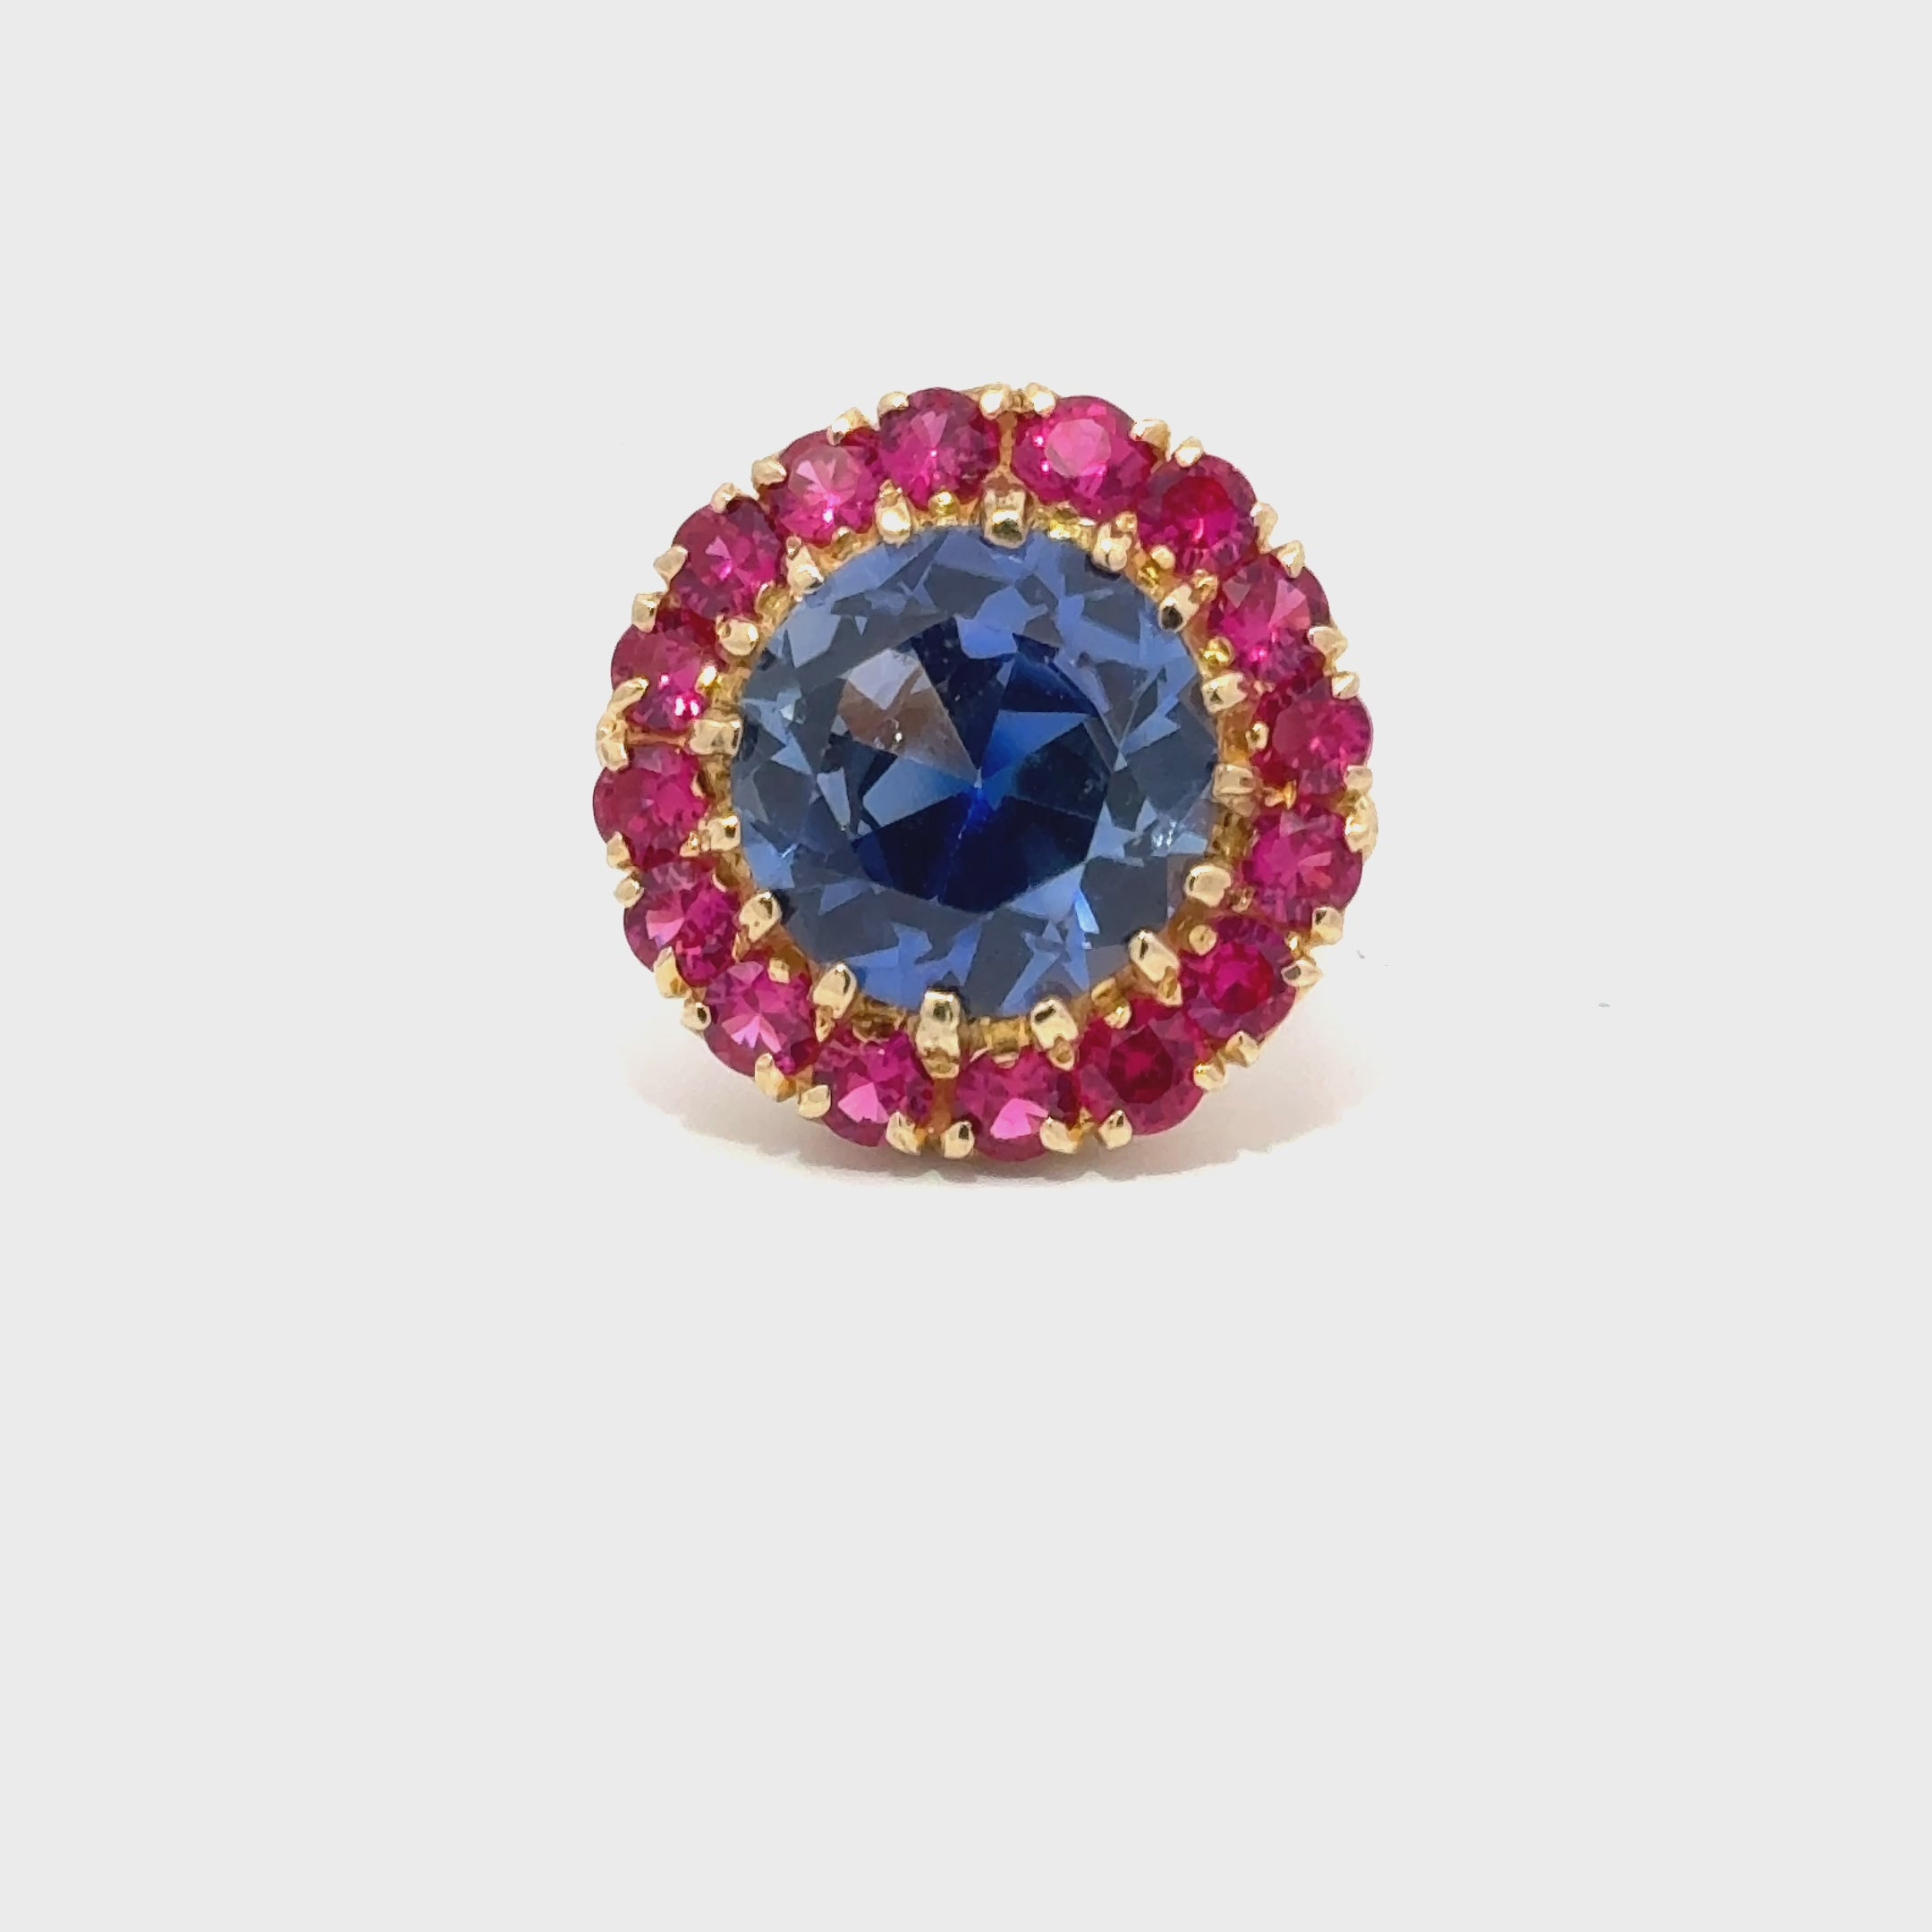 Blue And Red Gemstones On A Gold Ring